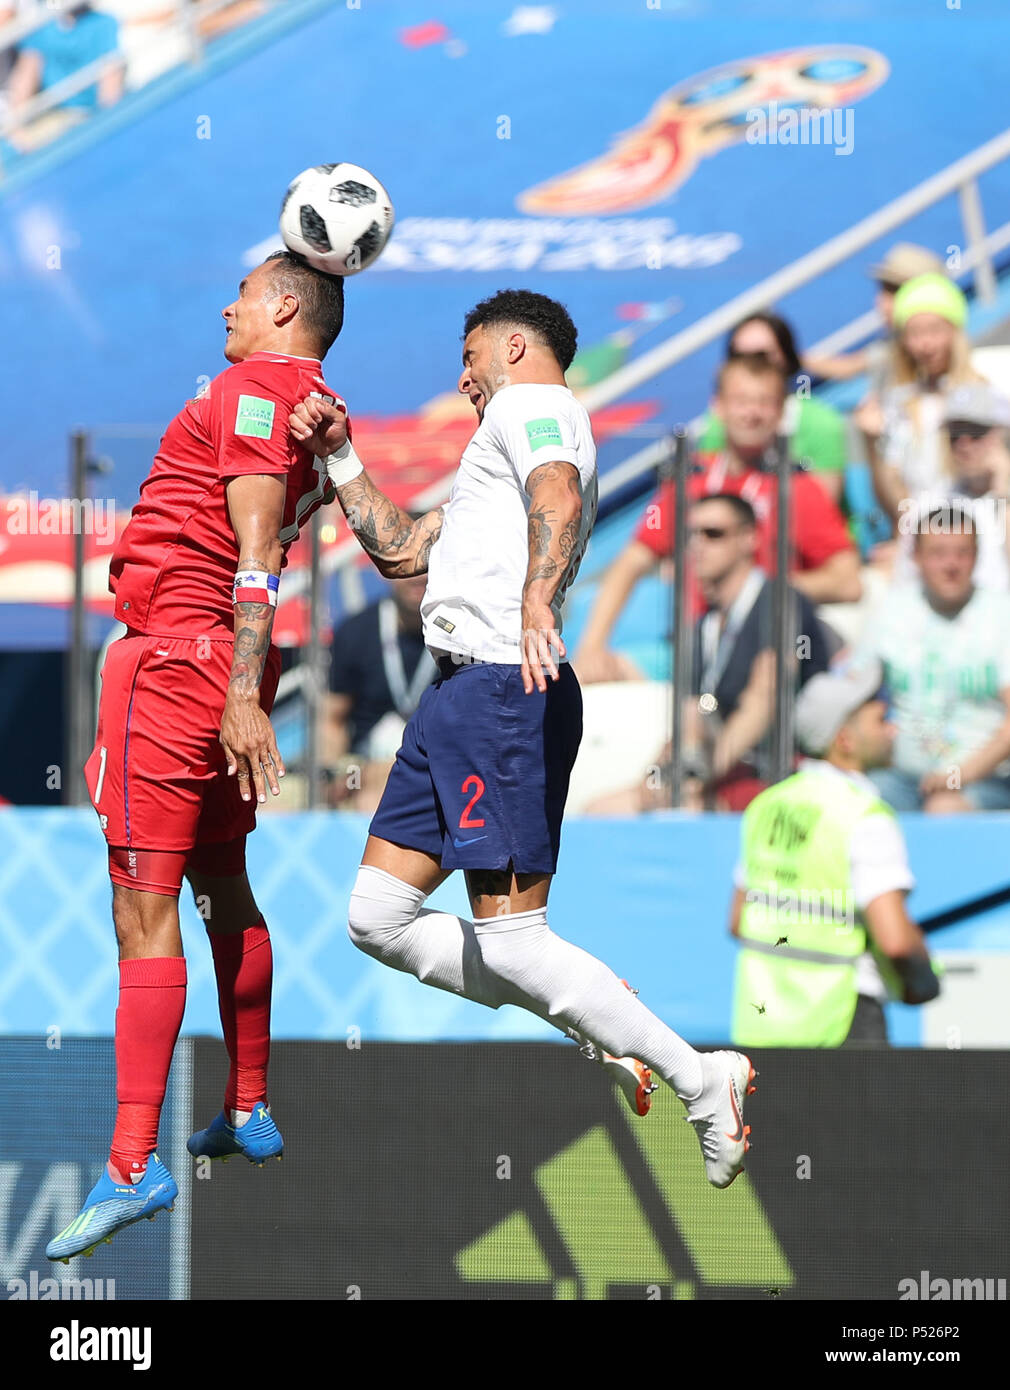 Nizhny Govgorod, Russia. 24th June, 2018. Blas Perez (L) of Panama competes for a header with Kyle Walker of England during the 2018 FIFA World Cup Group G match between England and Panama in Nizhny Govgorod, Russia, June 24, 2018. Credit: Xu Zijian/Xinhua/Alamy Live News Stock Photo